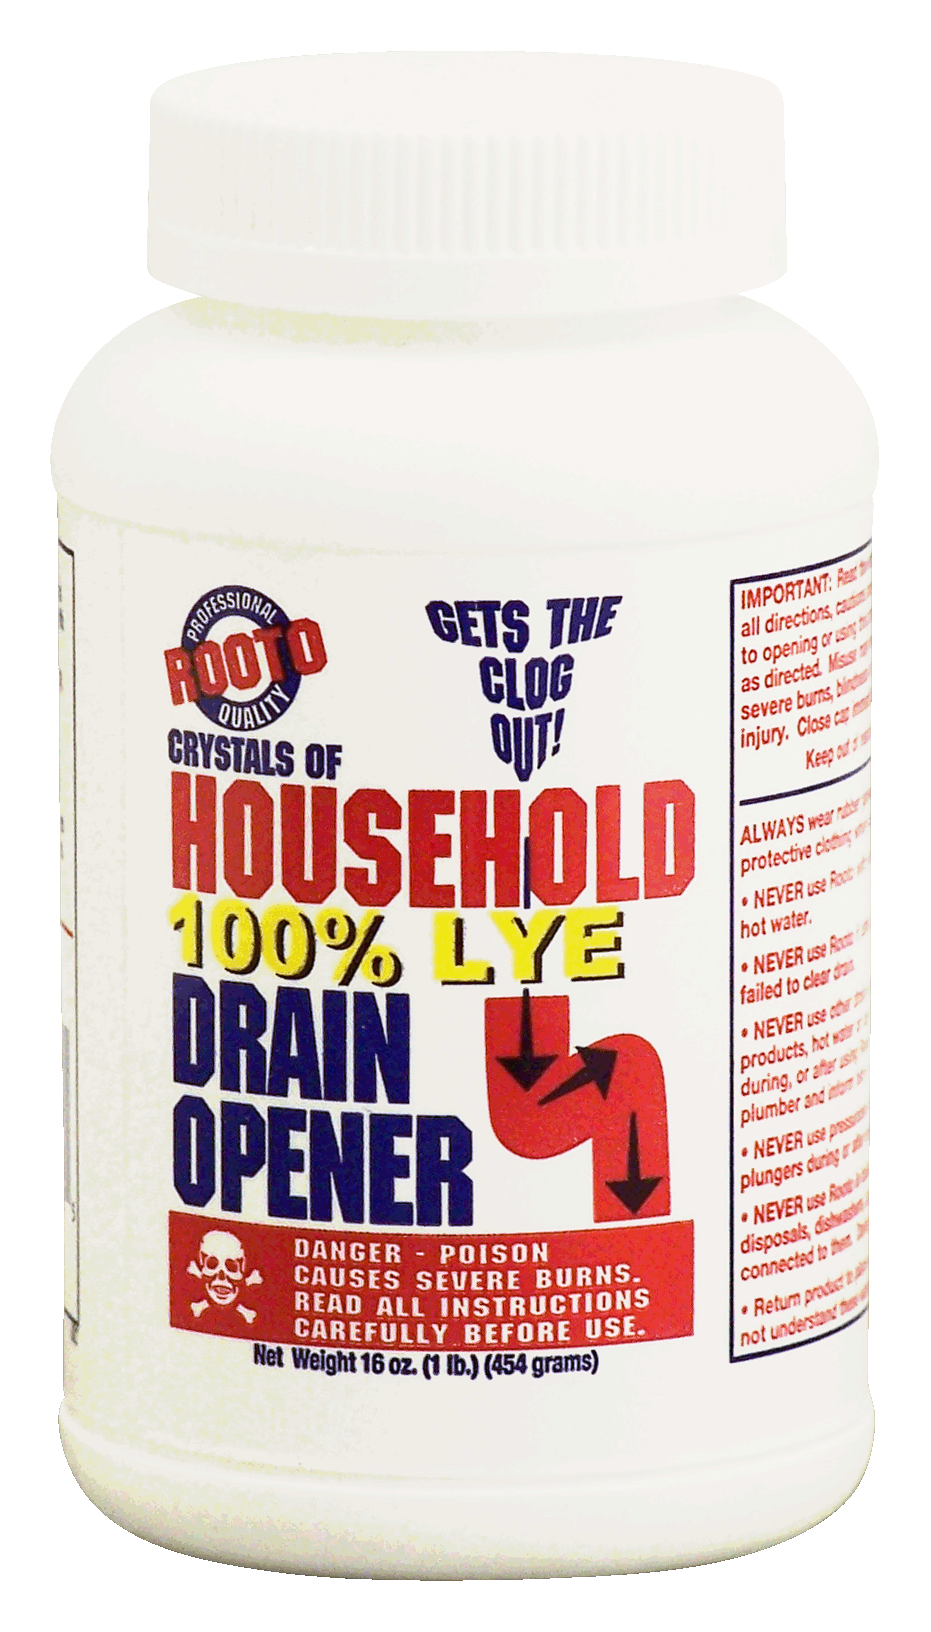 Rooto Crystals of Household 100% lye drain opener Full-Size Picture